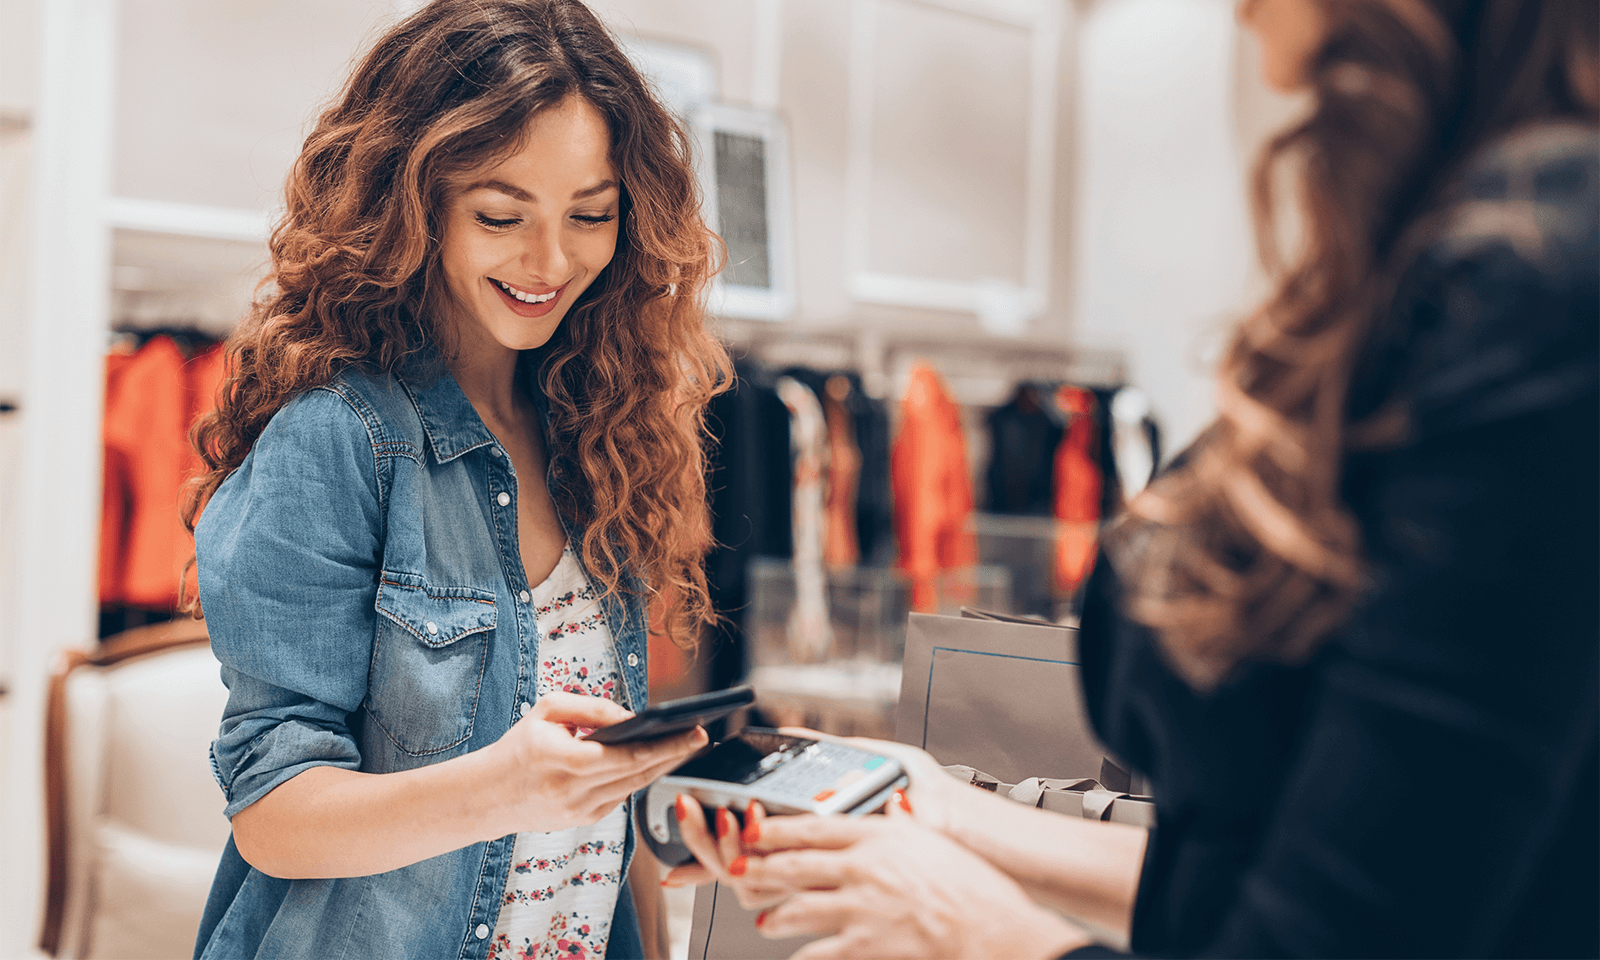 Understanding Your Online Shoppers: 4 Ways to Create a Positive Experience